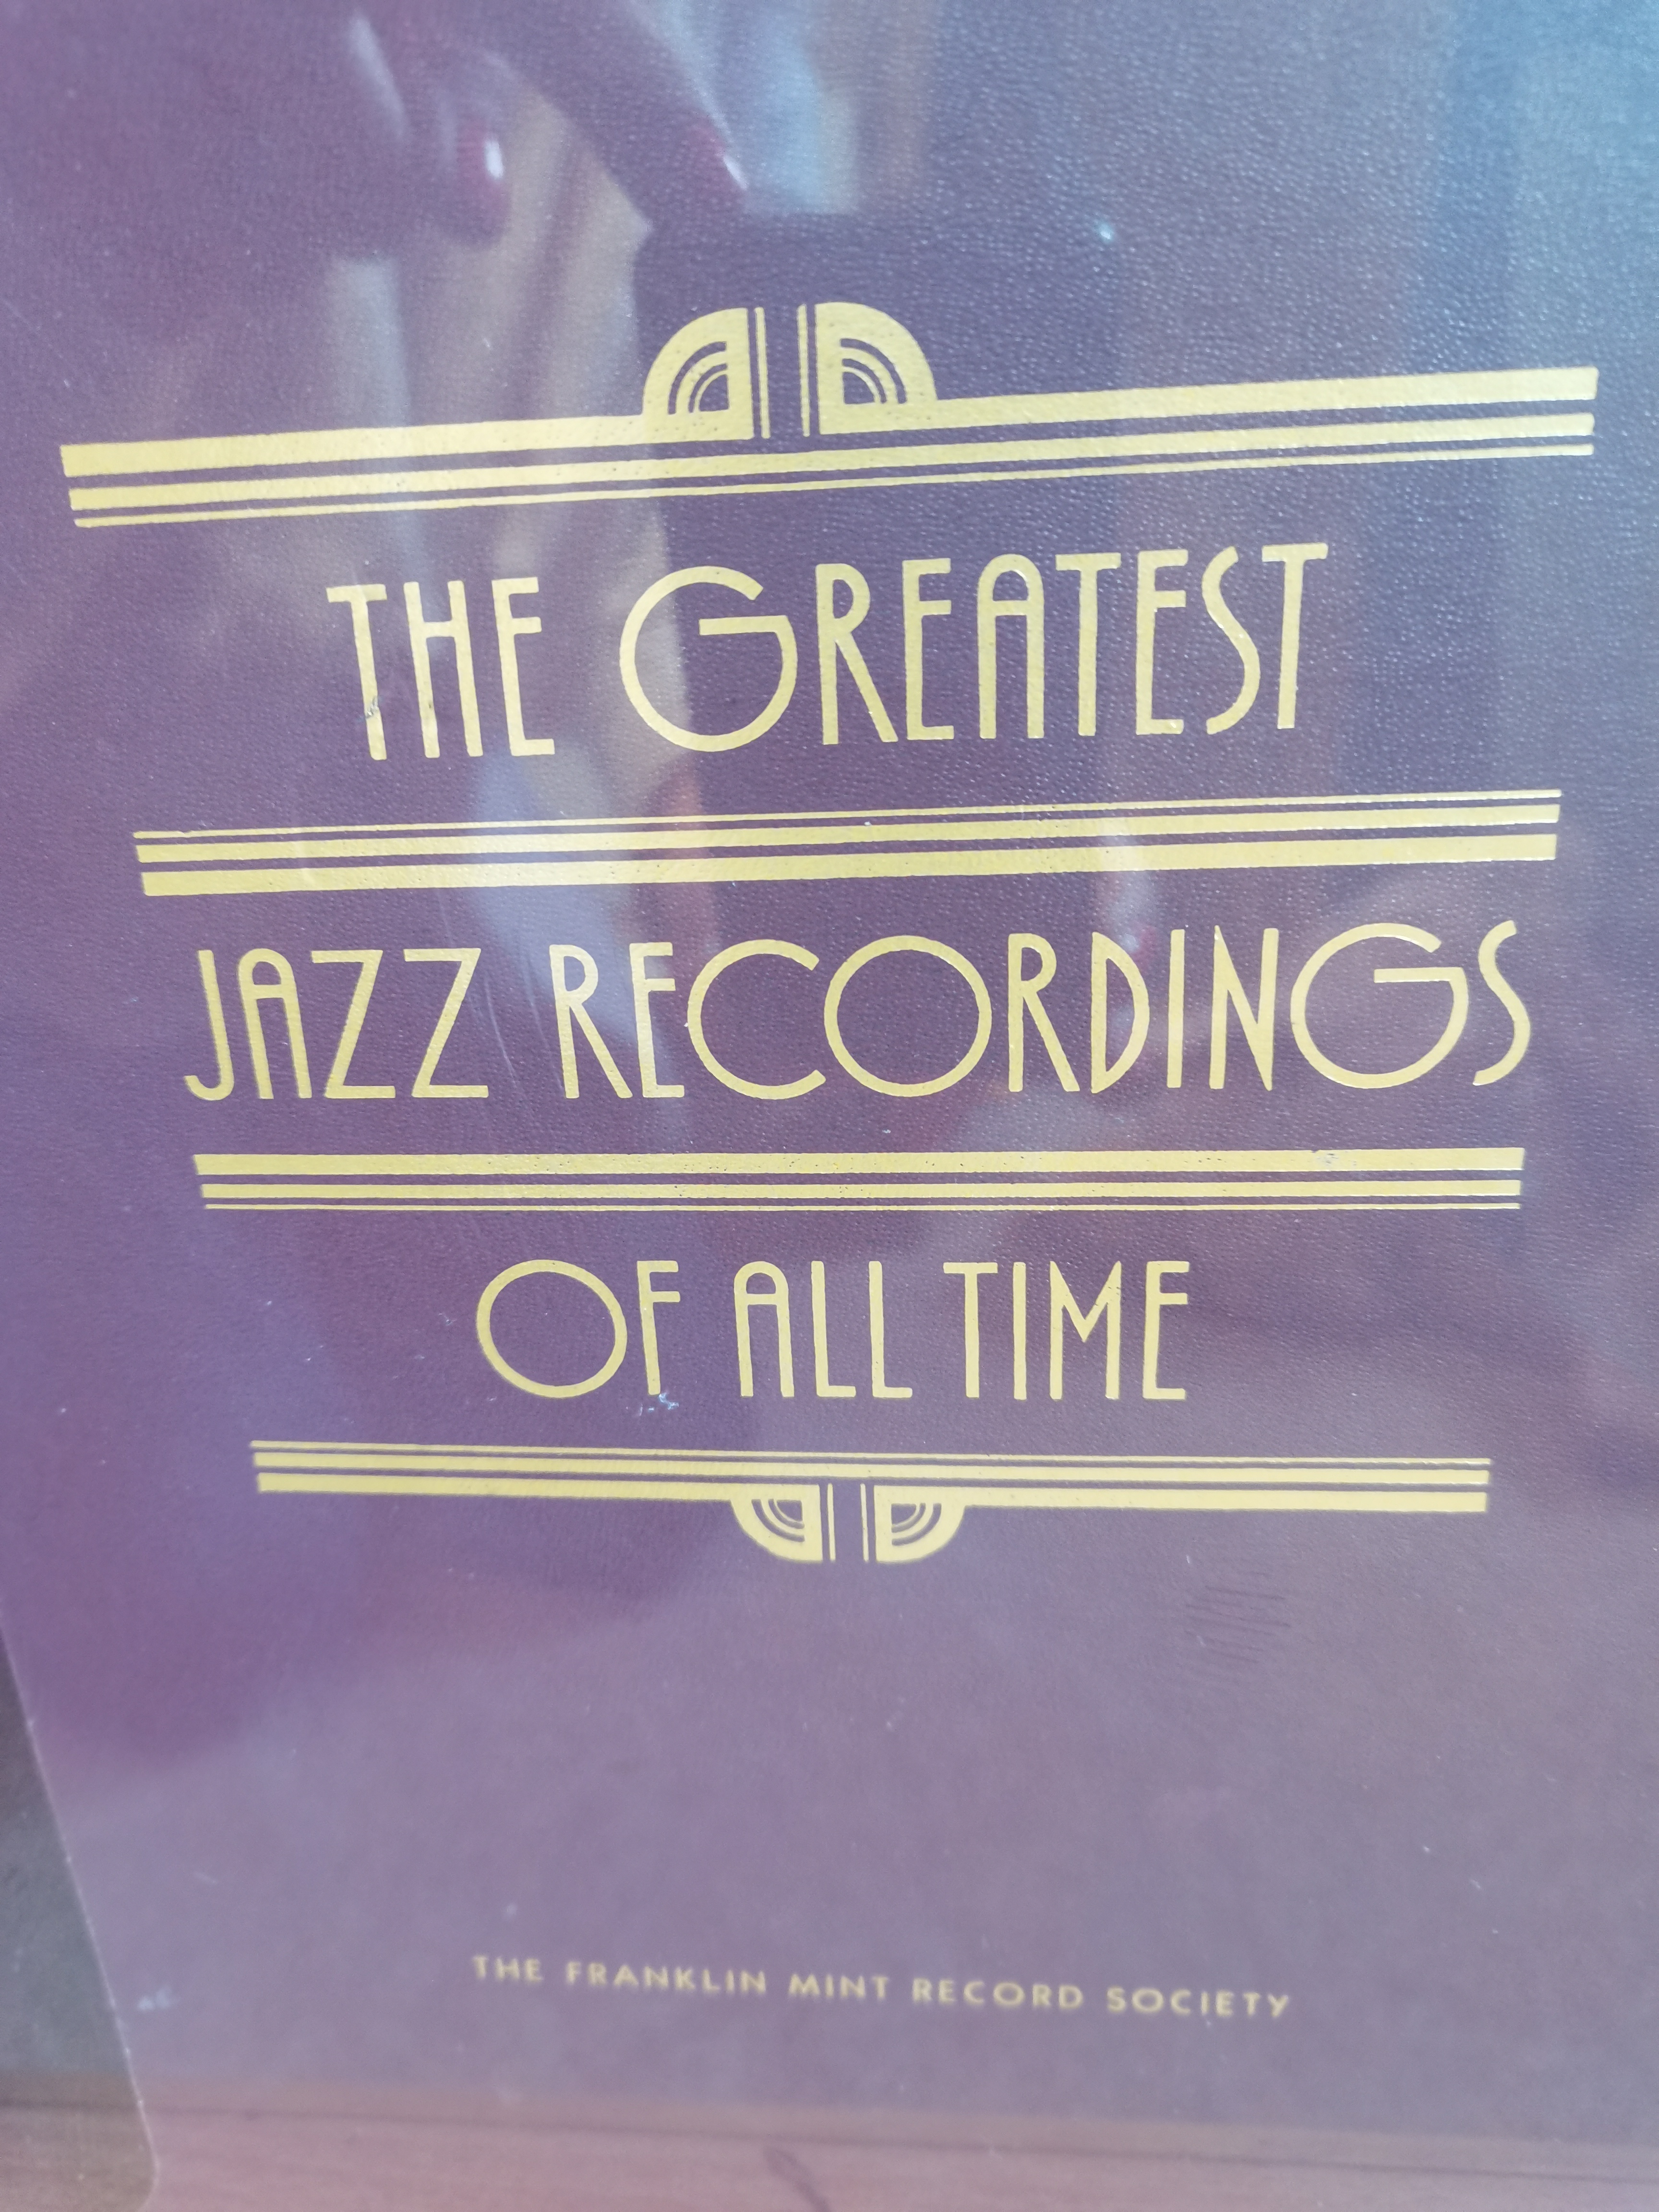 Complete Jazz box set collection (25) on purple vinyl from late 1980s still sealed - Image 2 of 2